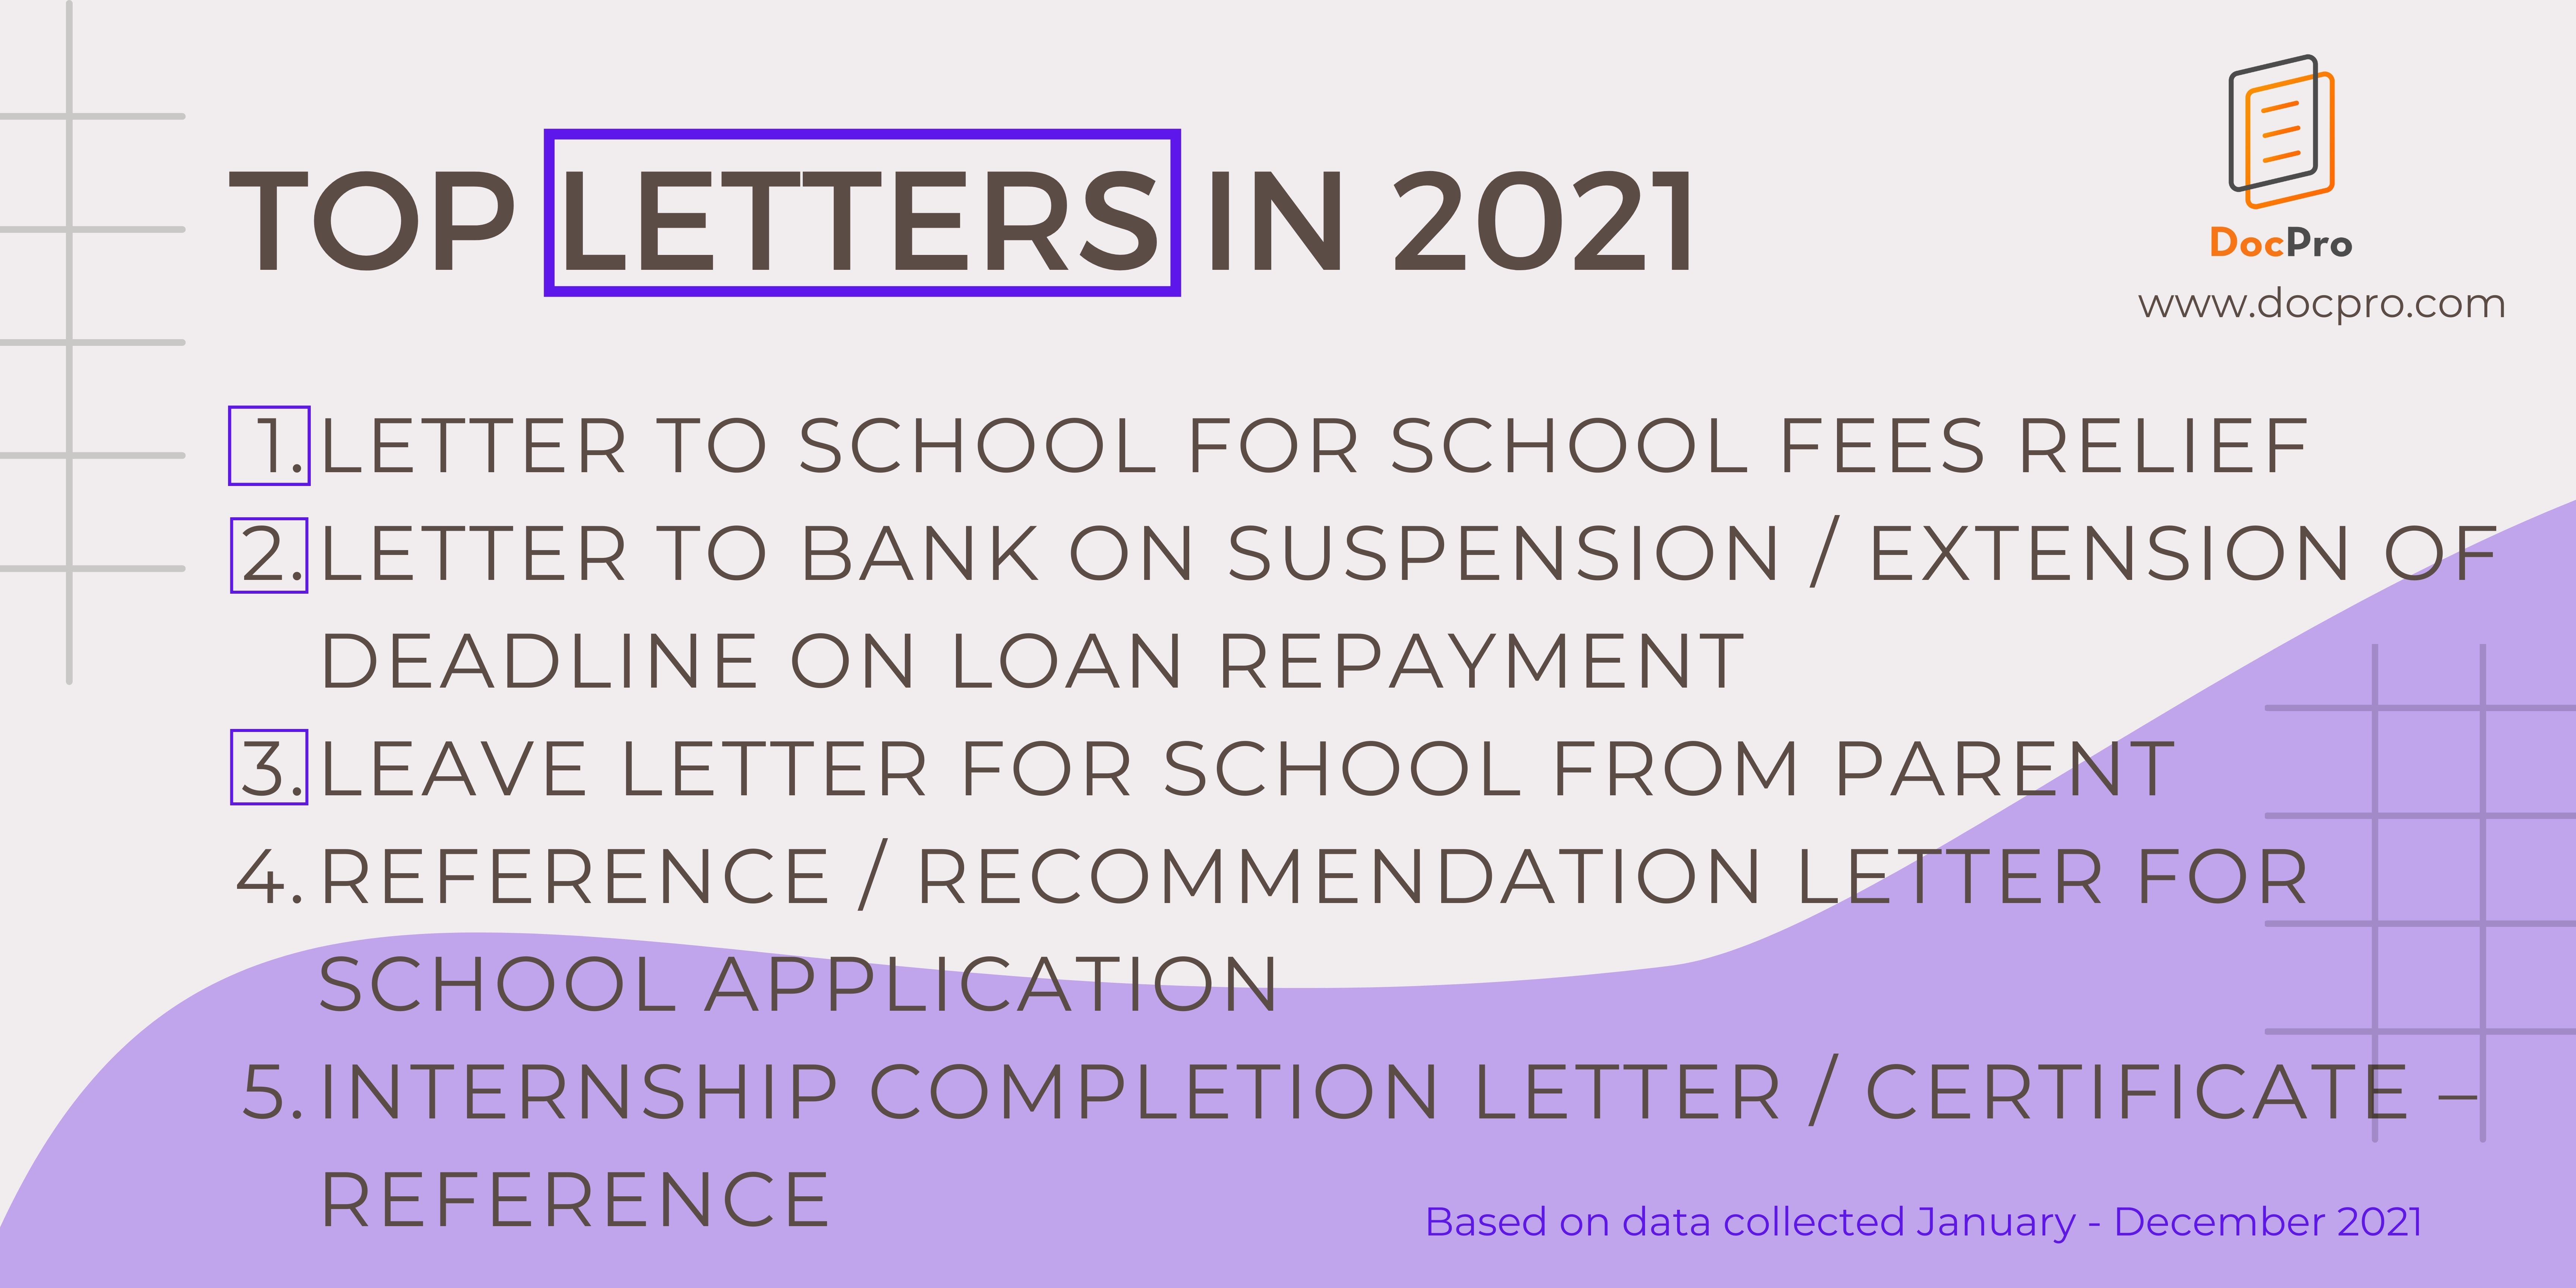 Most Popular Letters of 2021